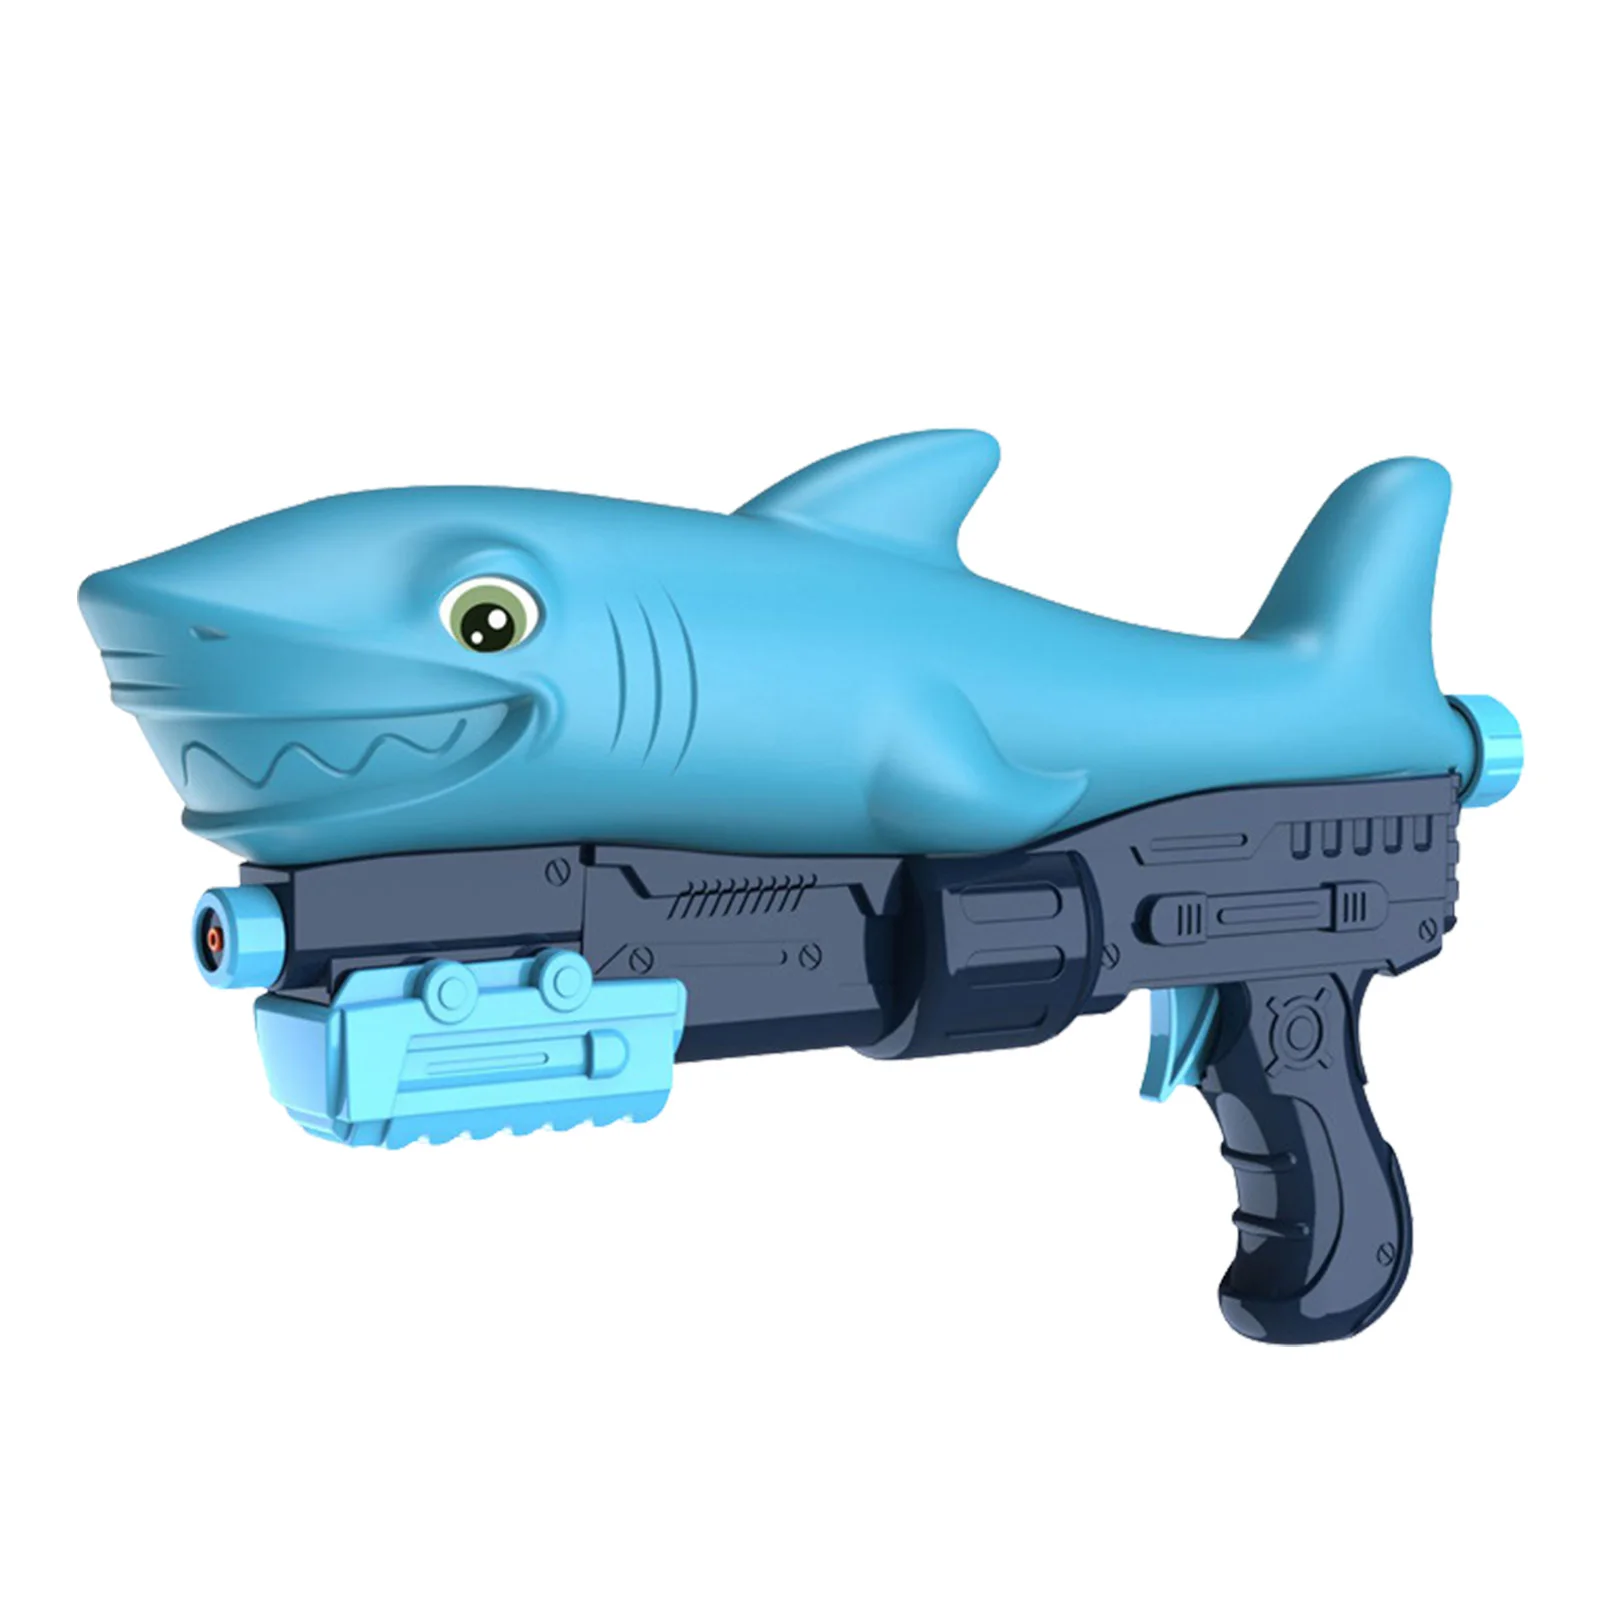 

Sharks Water Guns For Kids Squirt Water Guns With Long Shooting Range For Boys Girls Water Blaster Toys For Summer Swimming Pool